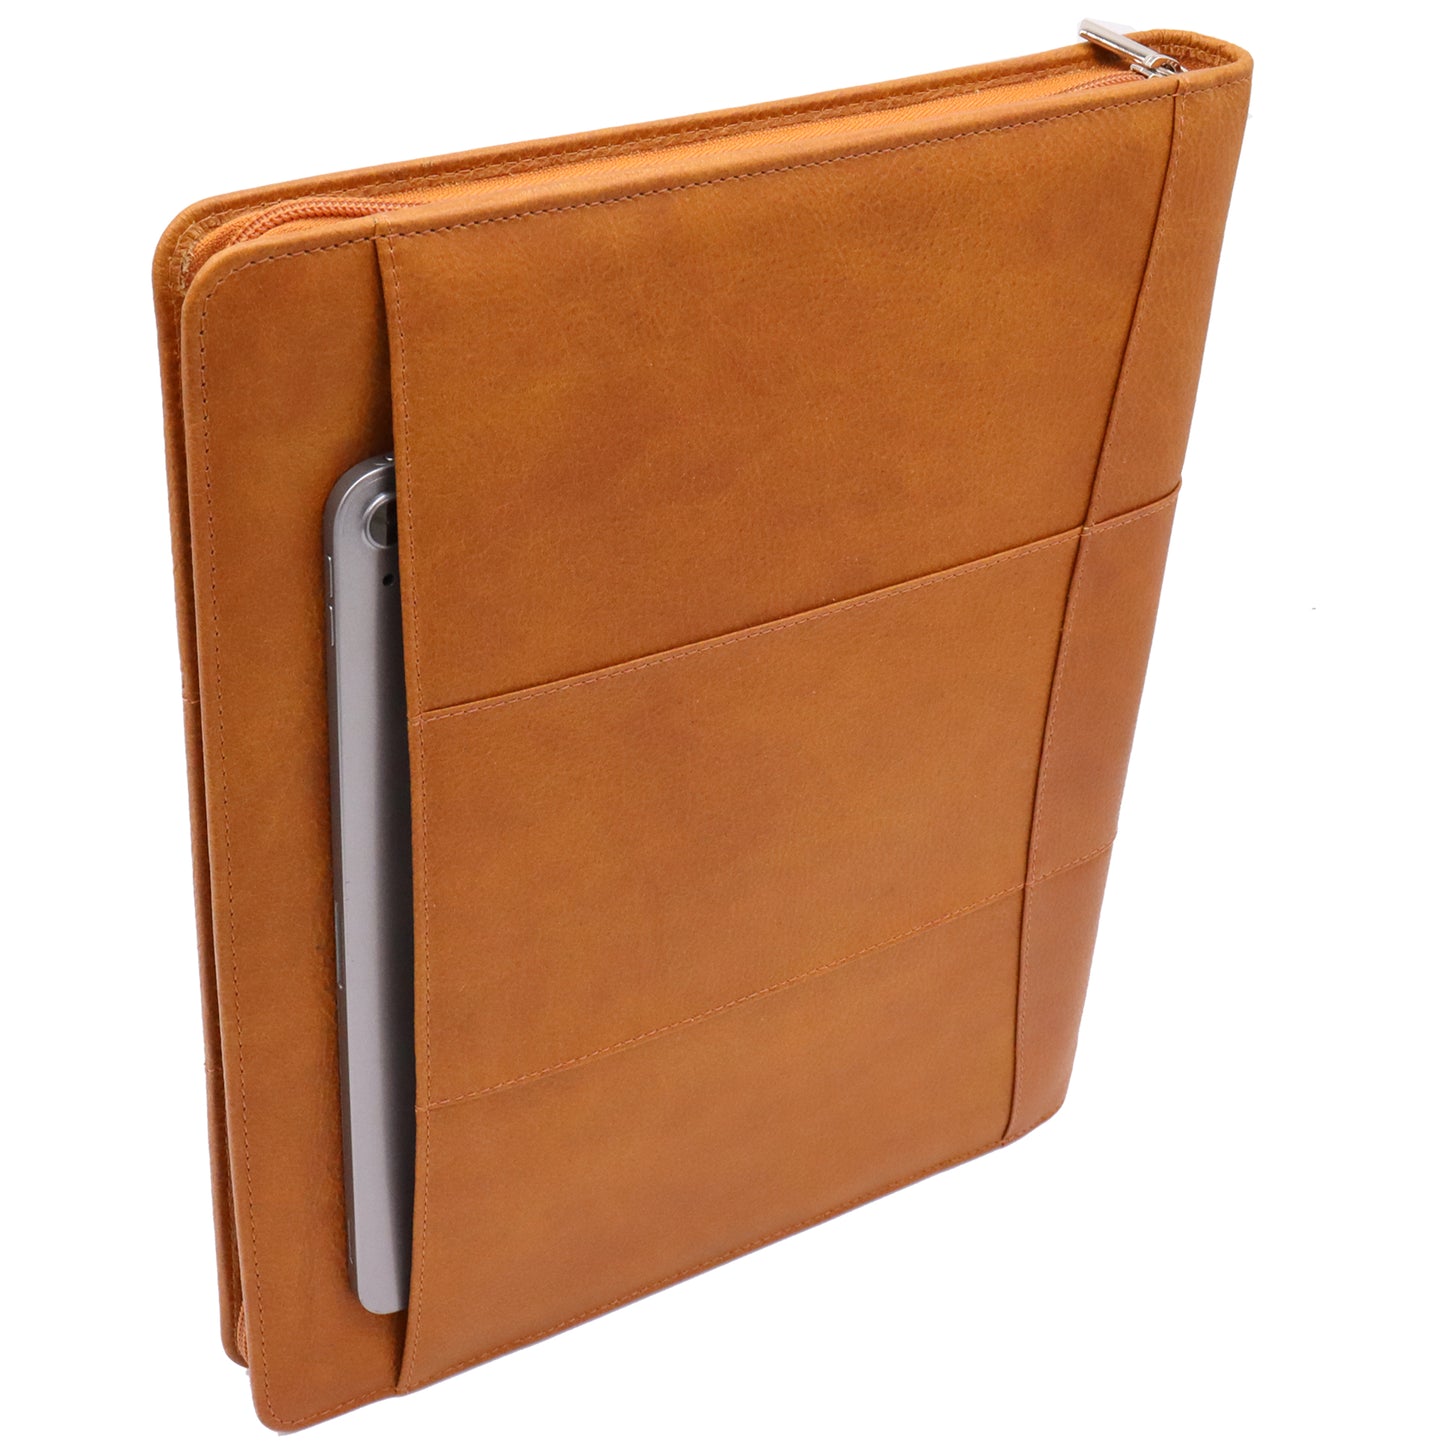 Safekeepers Leather Writing Case - Conference Folder - Workbook Tablet Sleeve &amp; Laptop Sleeve - Removable Ring Binder A4 Tan